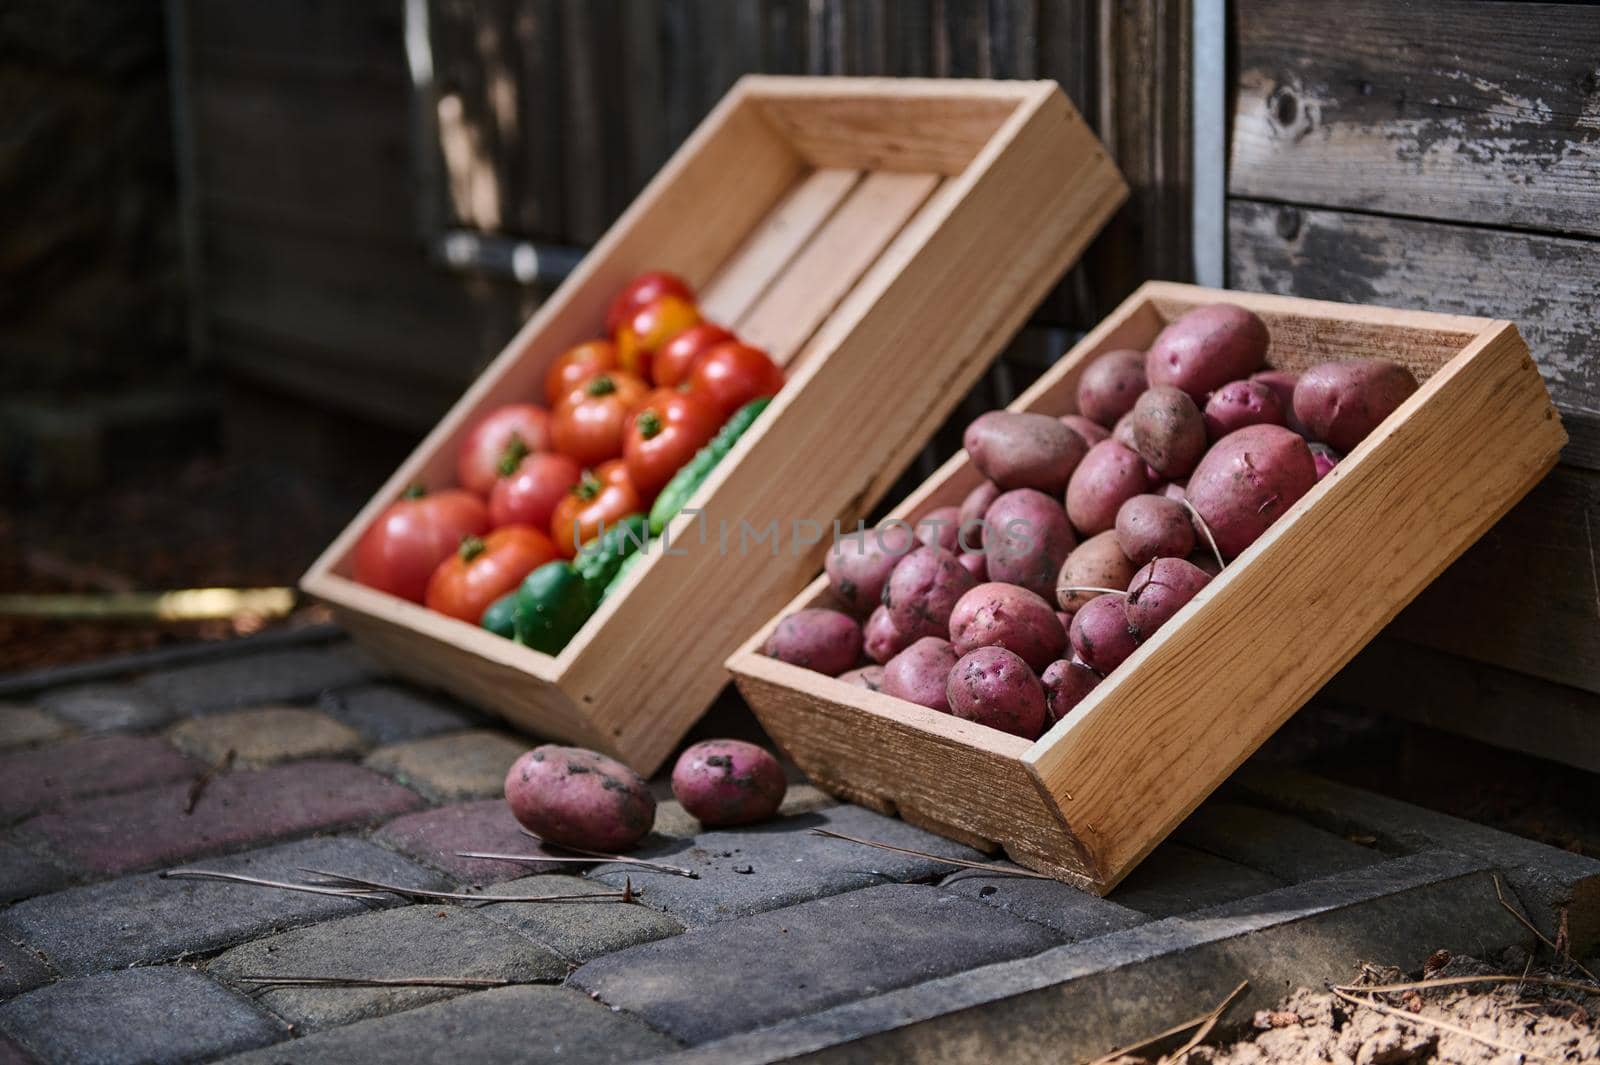 Wooden crate with harvested crop of pink potatoes and box with ripe juicy tomatoes and cucumbers, on rustic background by artgf